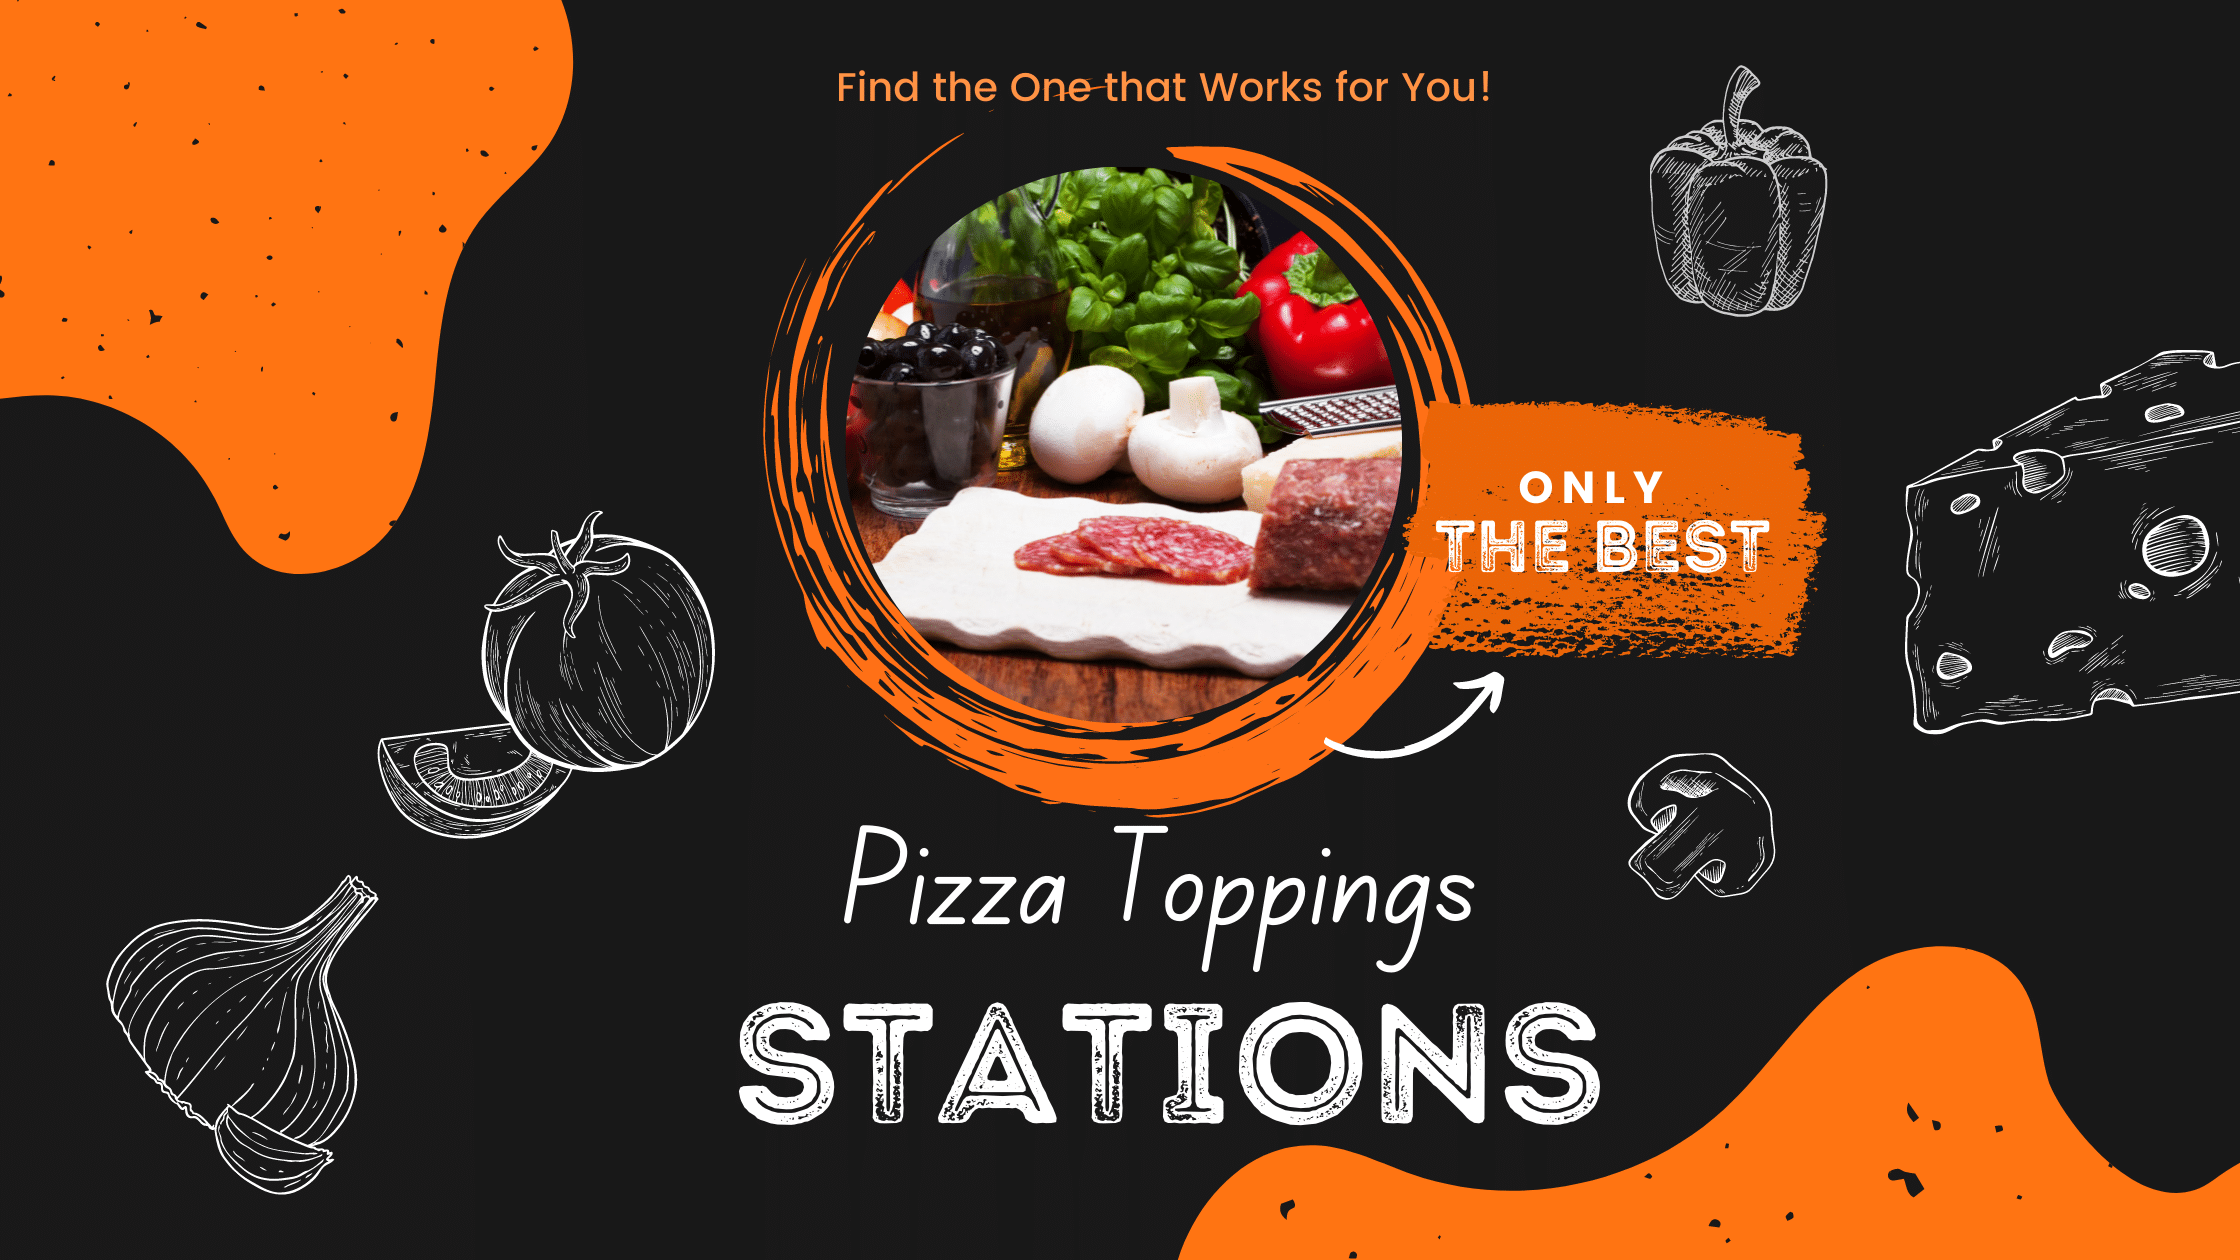 Pizza Toppings Stations: Find the Best for You!